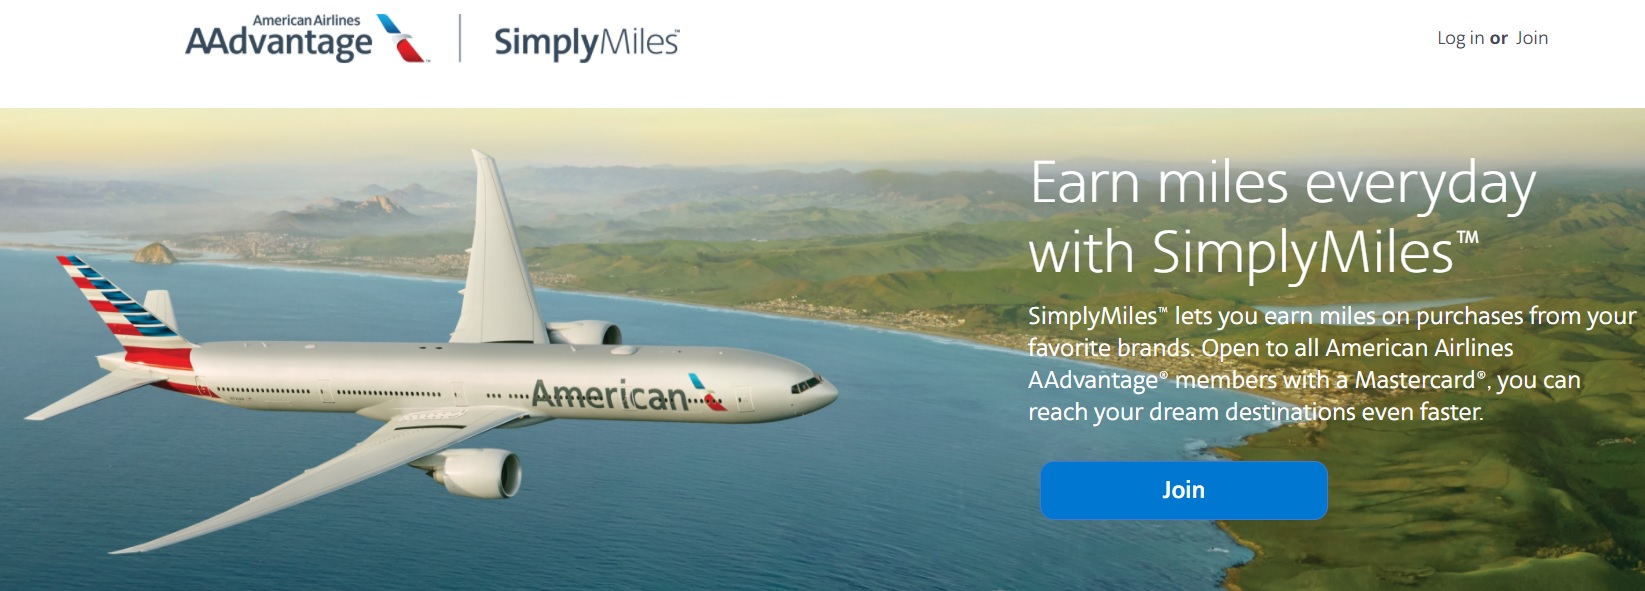 American Airlines SimplyMiles